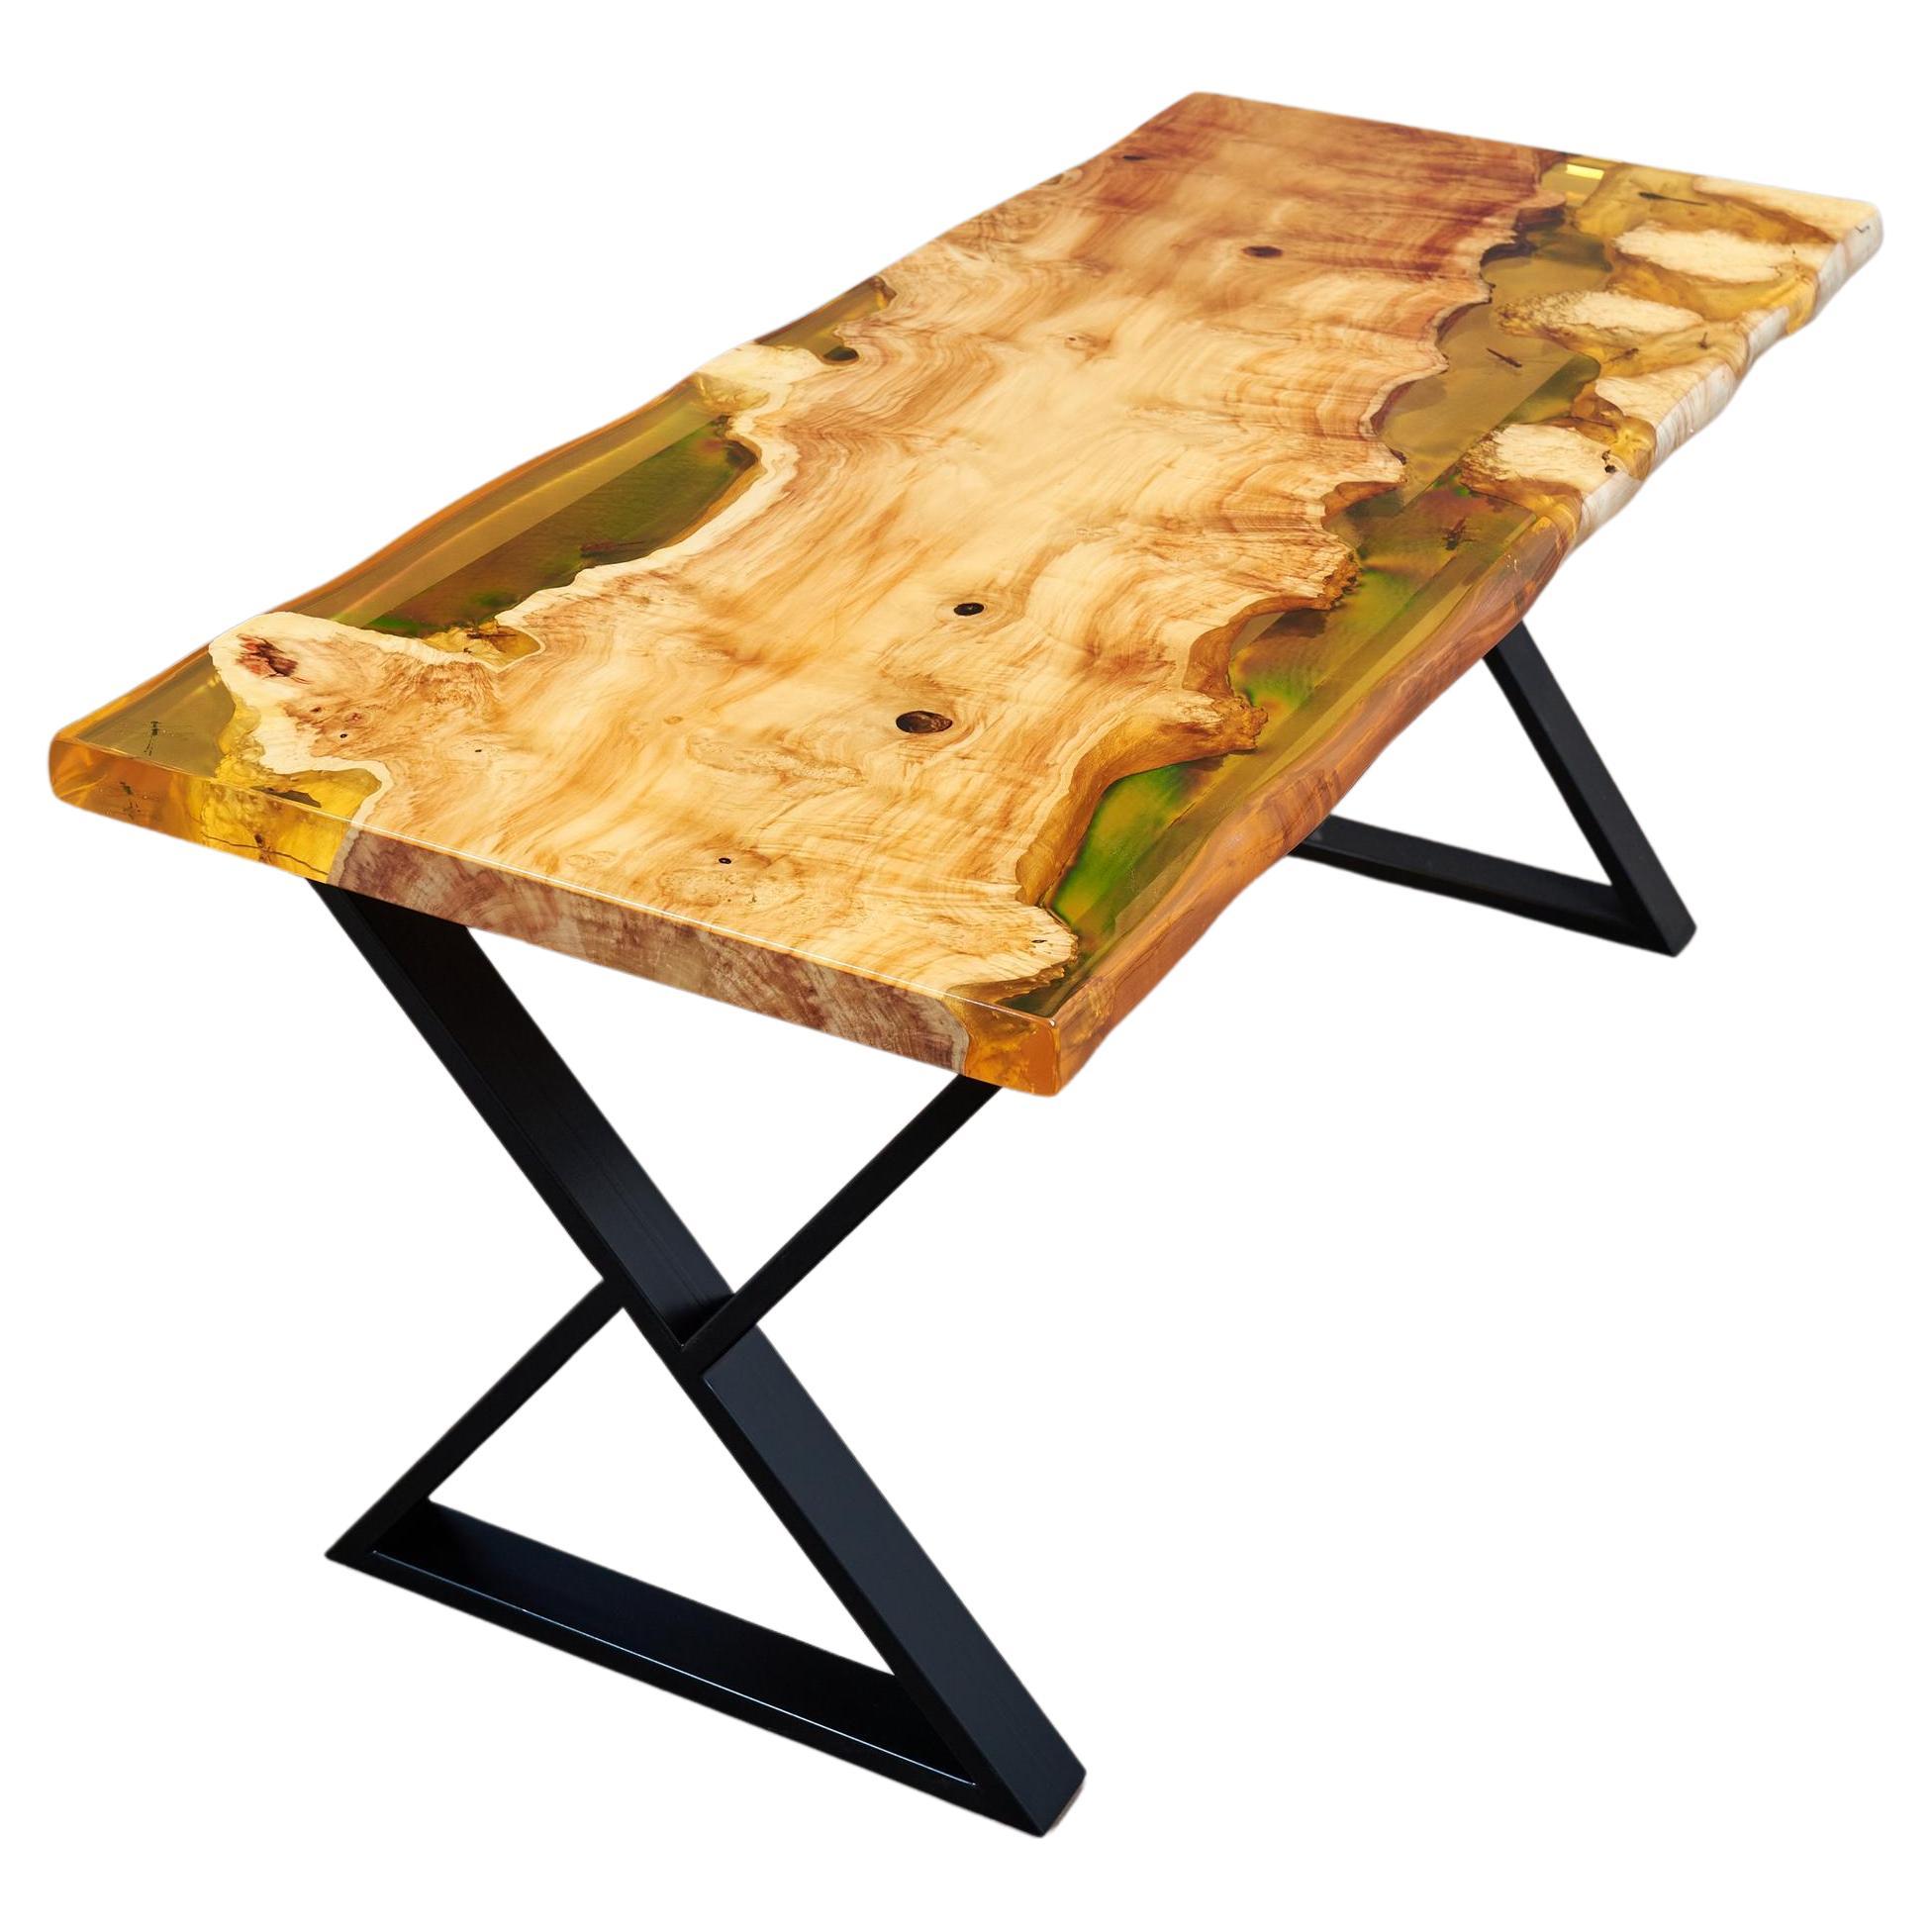 Burl Wood Modern Dining Table Luxury Vintage Dining Burl Table Handmade Tables For Sale